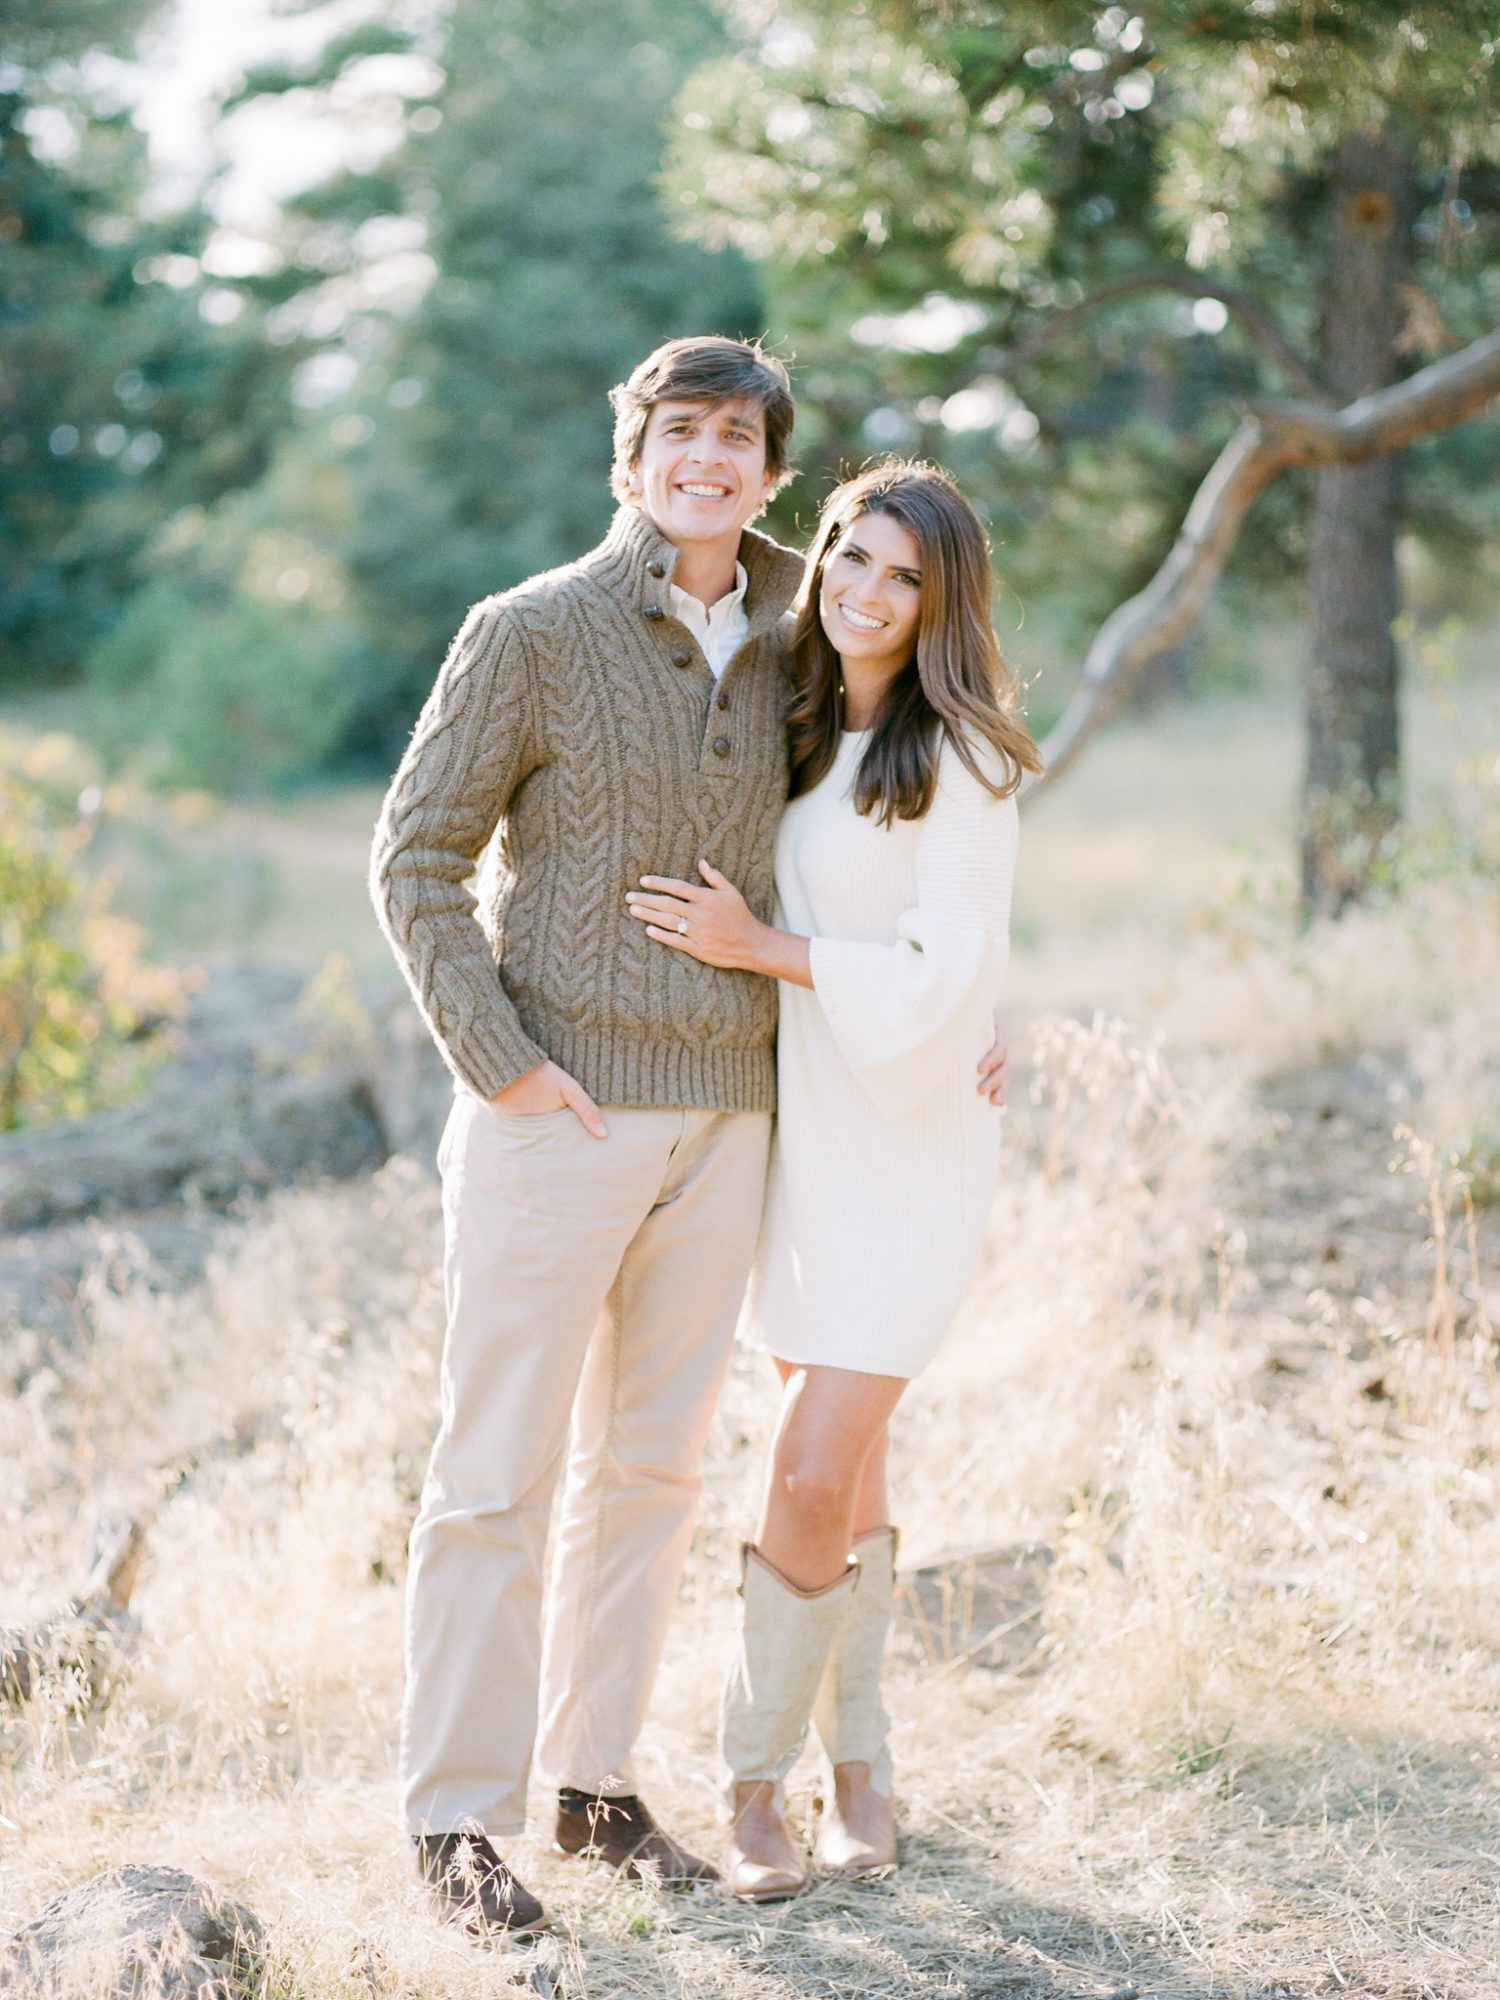 The cutest neutral outfits for this Outdoor Mountain Engagement Session by Rachel Havel